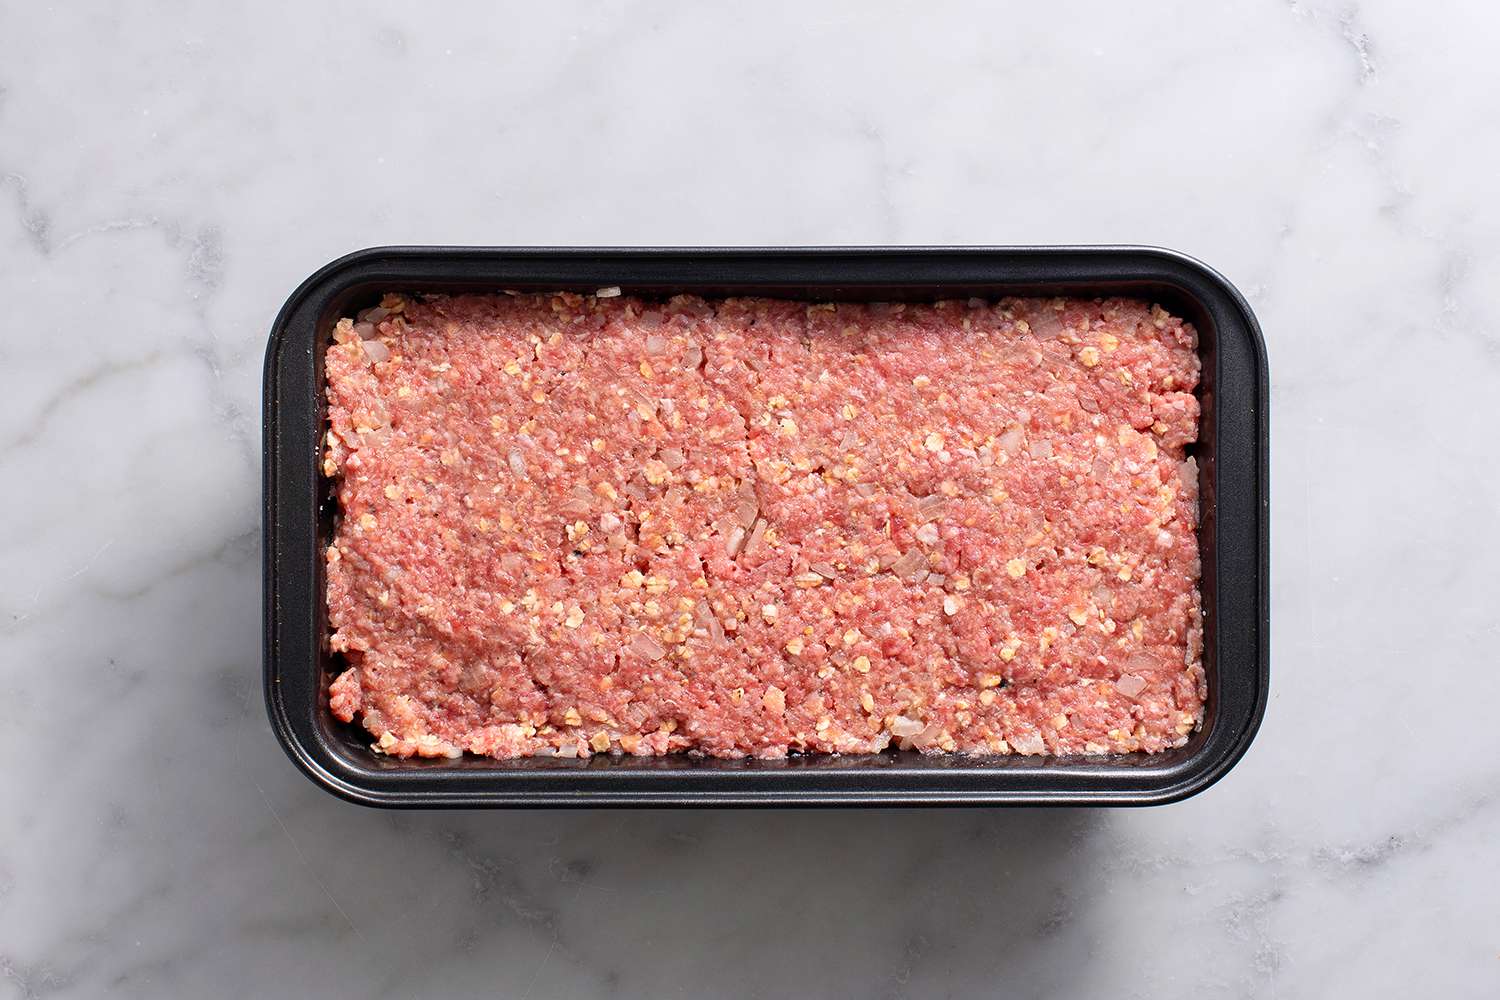 Raw meatloaf mixture filled into loaf pan with the top leveled and smoothed